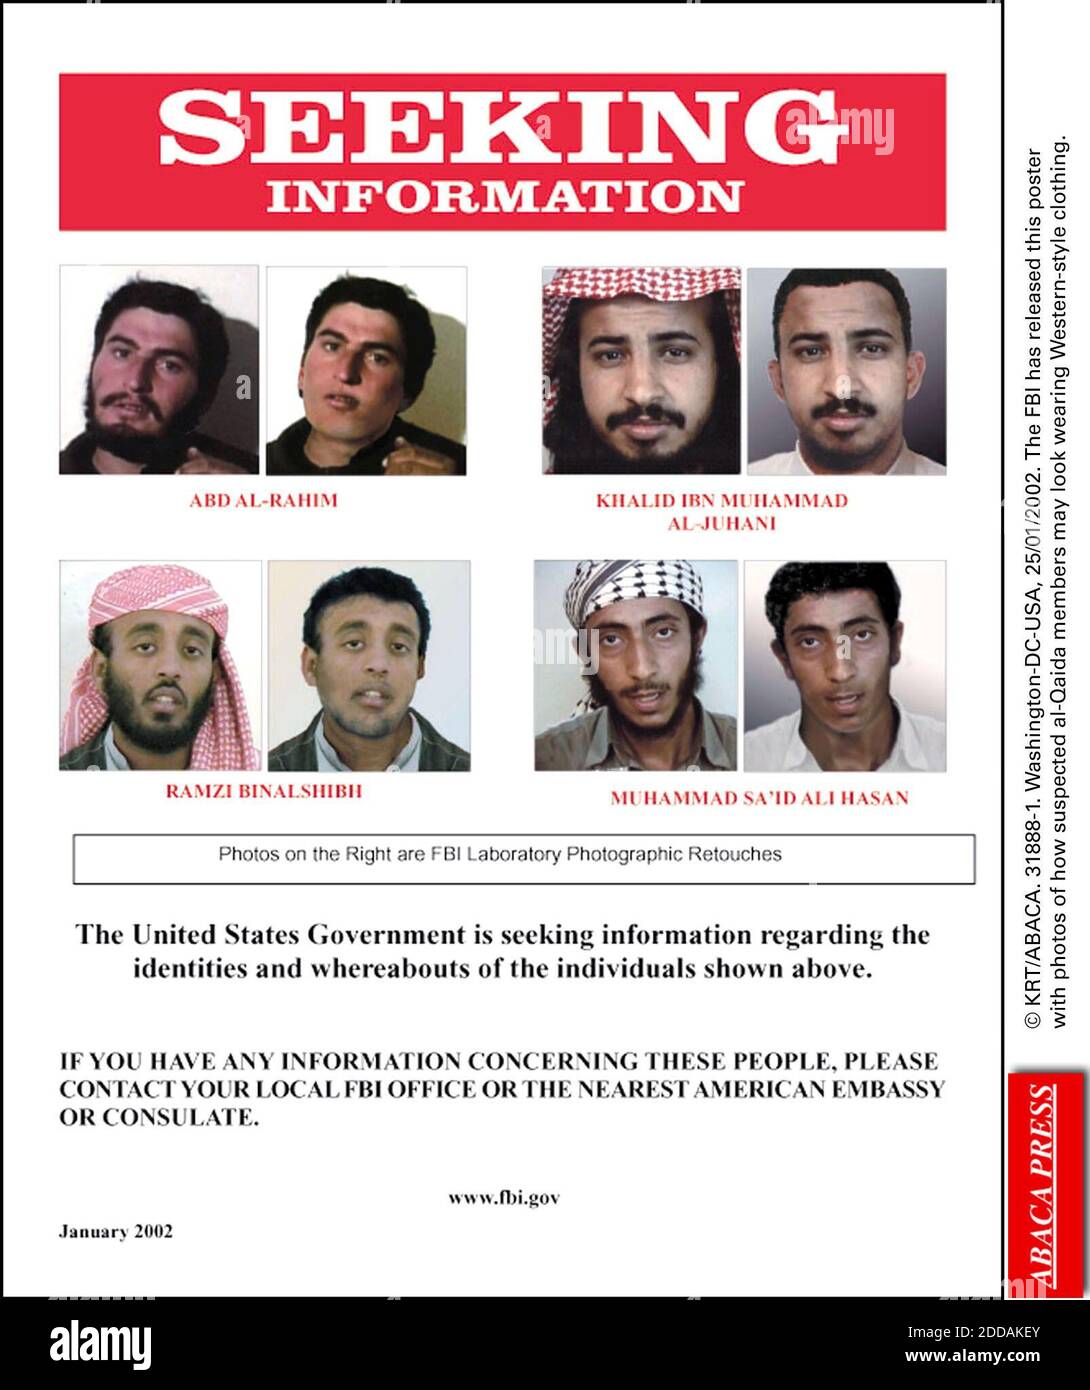 NO FILM, NO VIDEO, NO TV, NO DOCUMENTARY - © KRT/ABACA. 31888-1. Washington-DC-USA, 25/01/2002. The FBI has released this poster with photos of how suspected al-Qaida members may look wearing Western-style clothing. Stock Photo